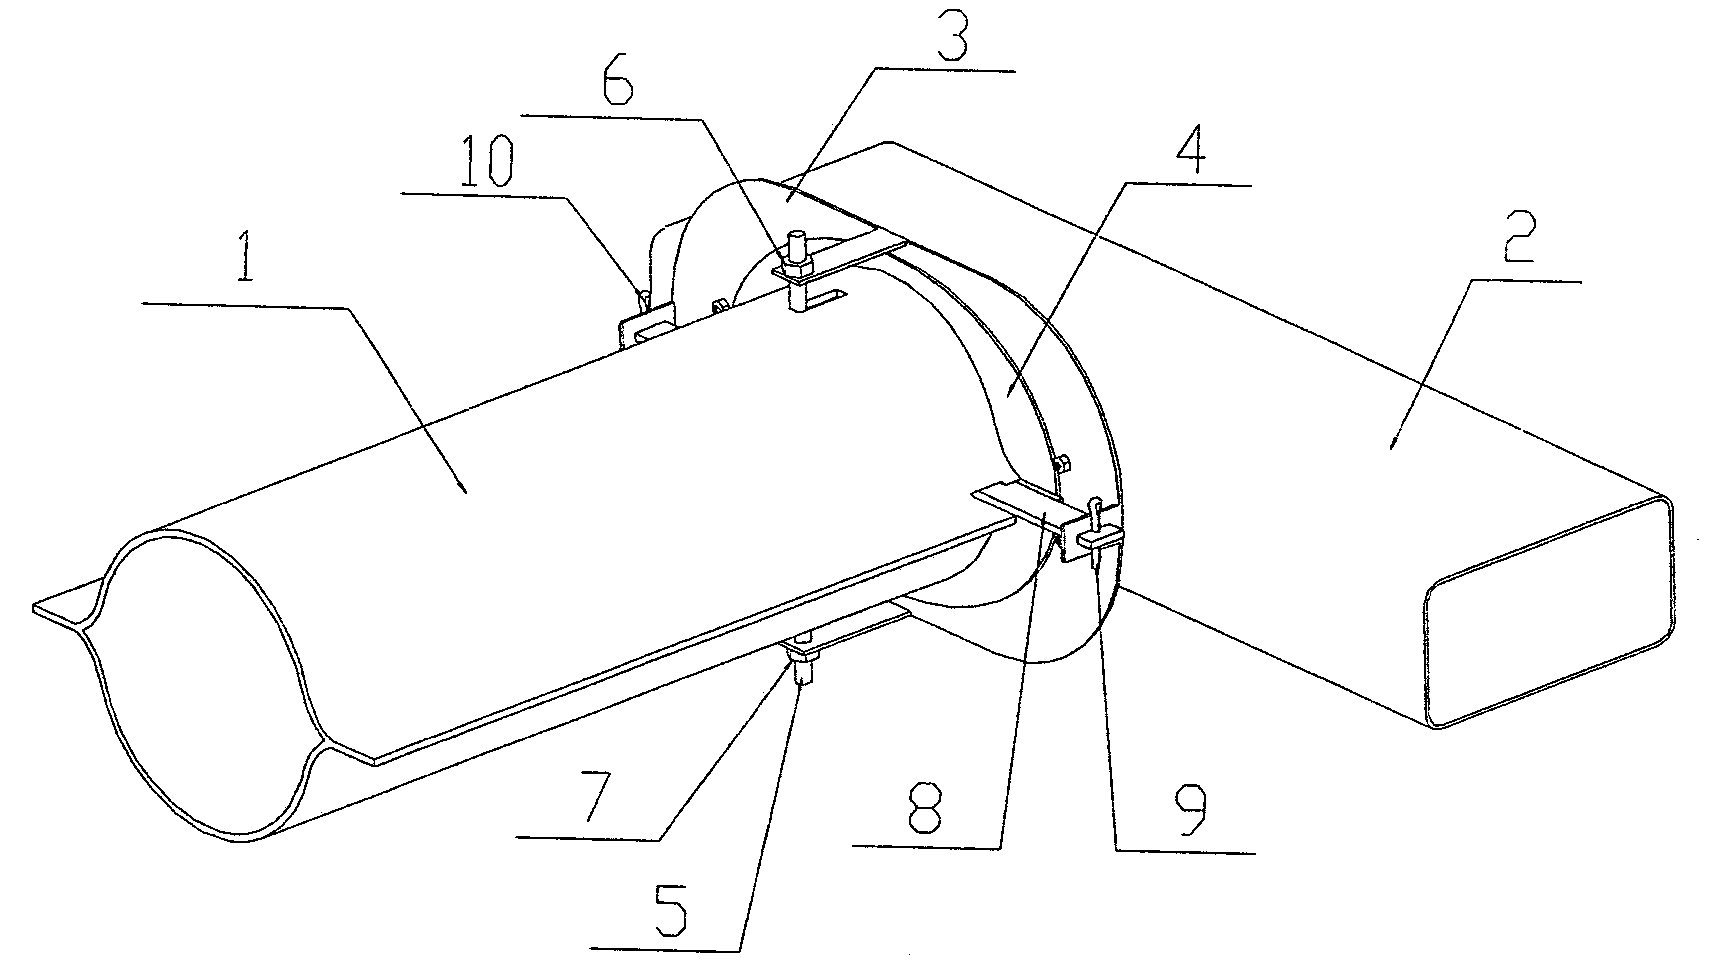 Weak connection device for flexible thin-walled tubes of spacecraft